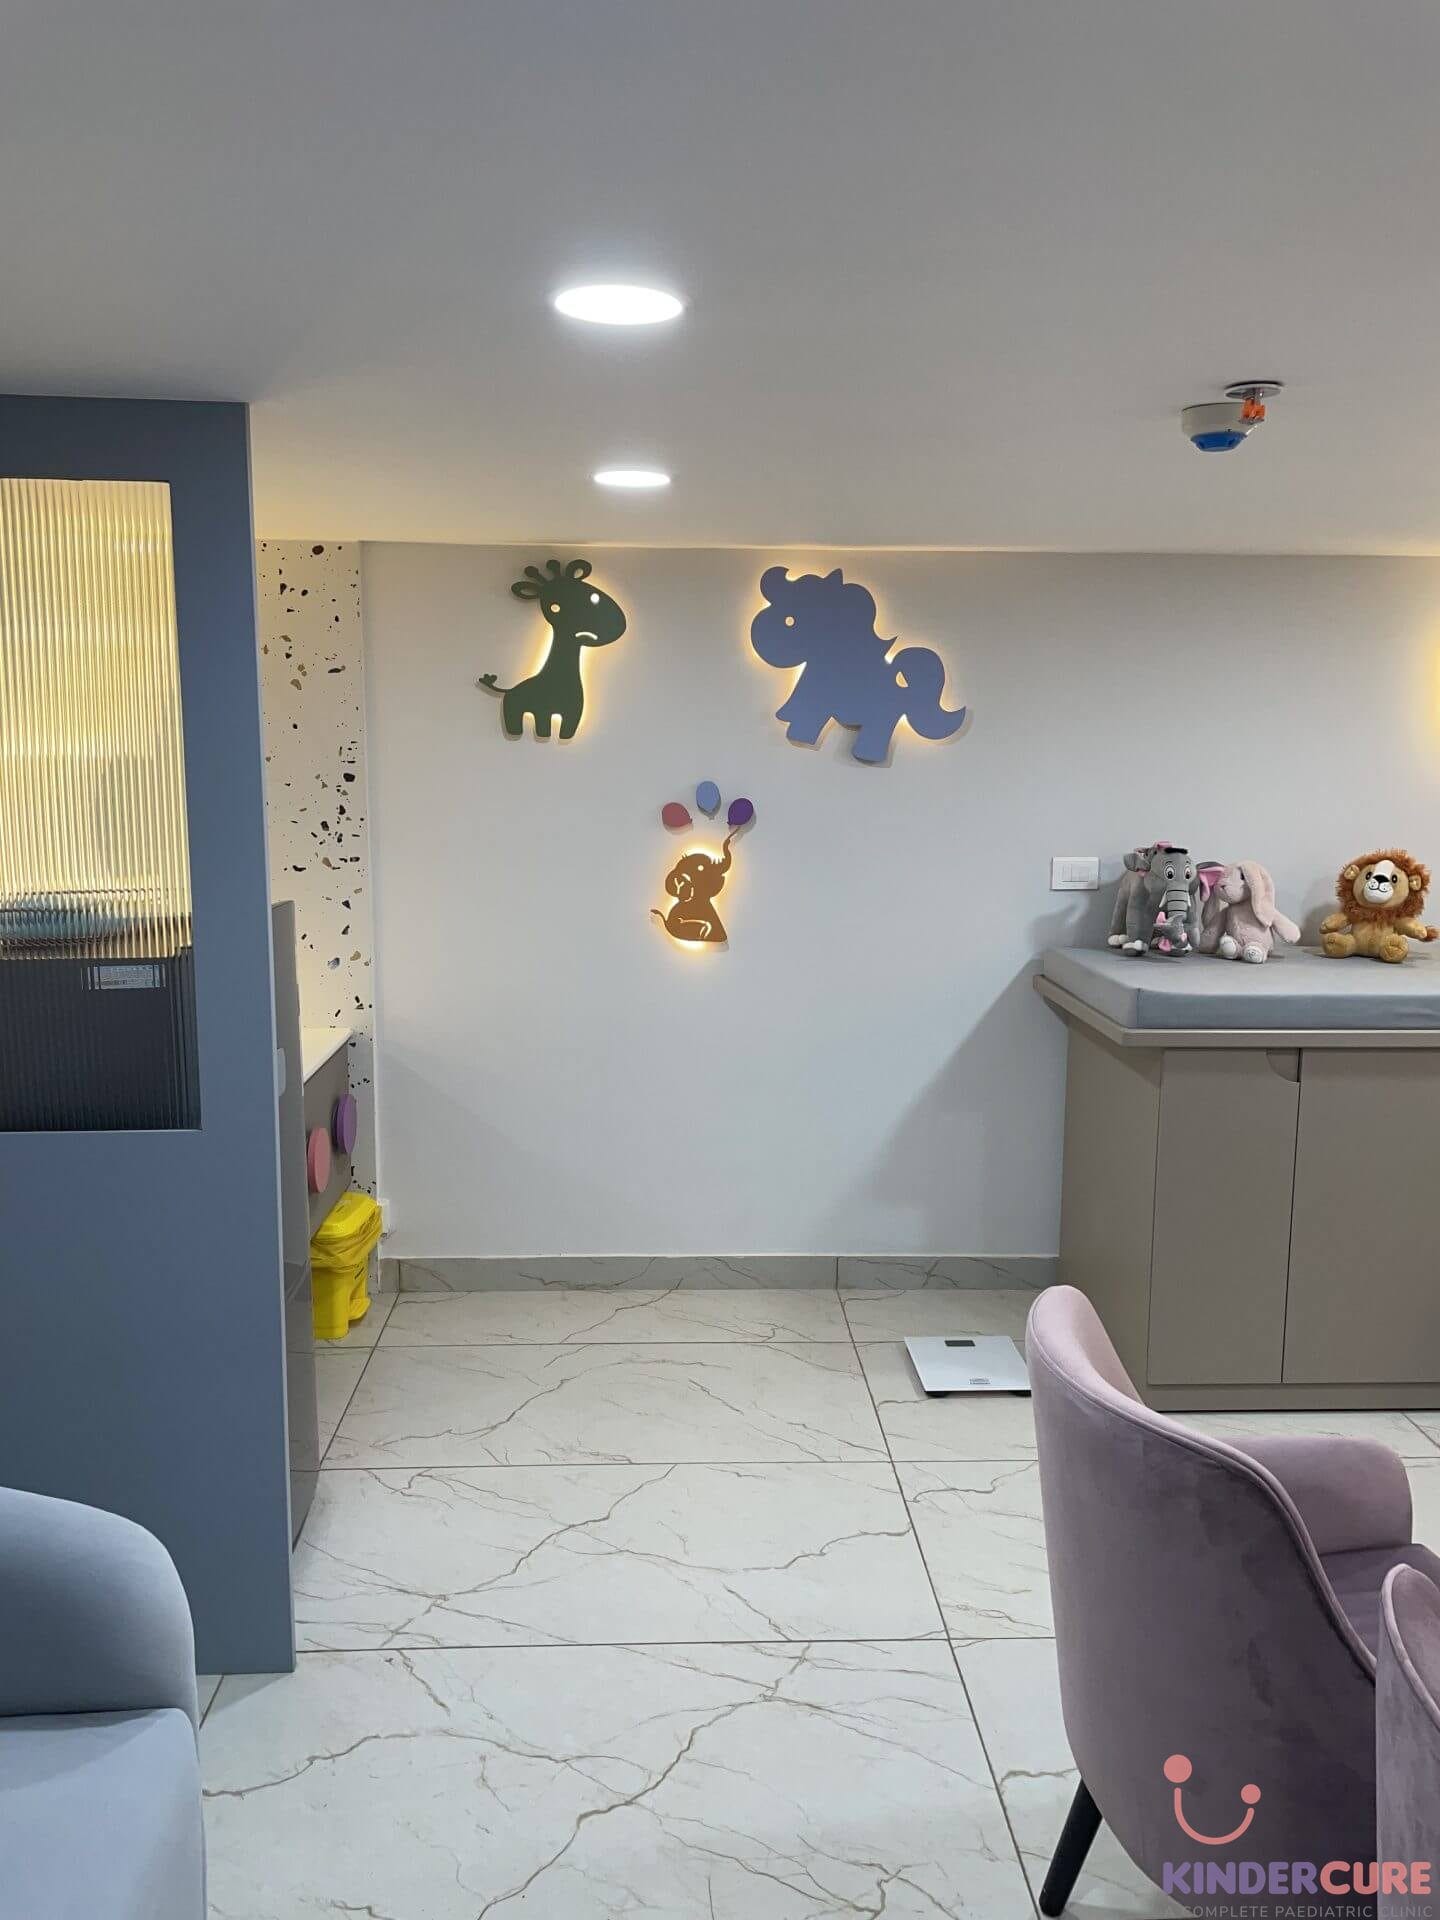 Clinic wall at KinderCure featuring cute backlit small animal figures, creating a warm and inviting atmosphere